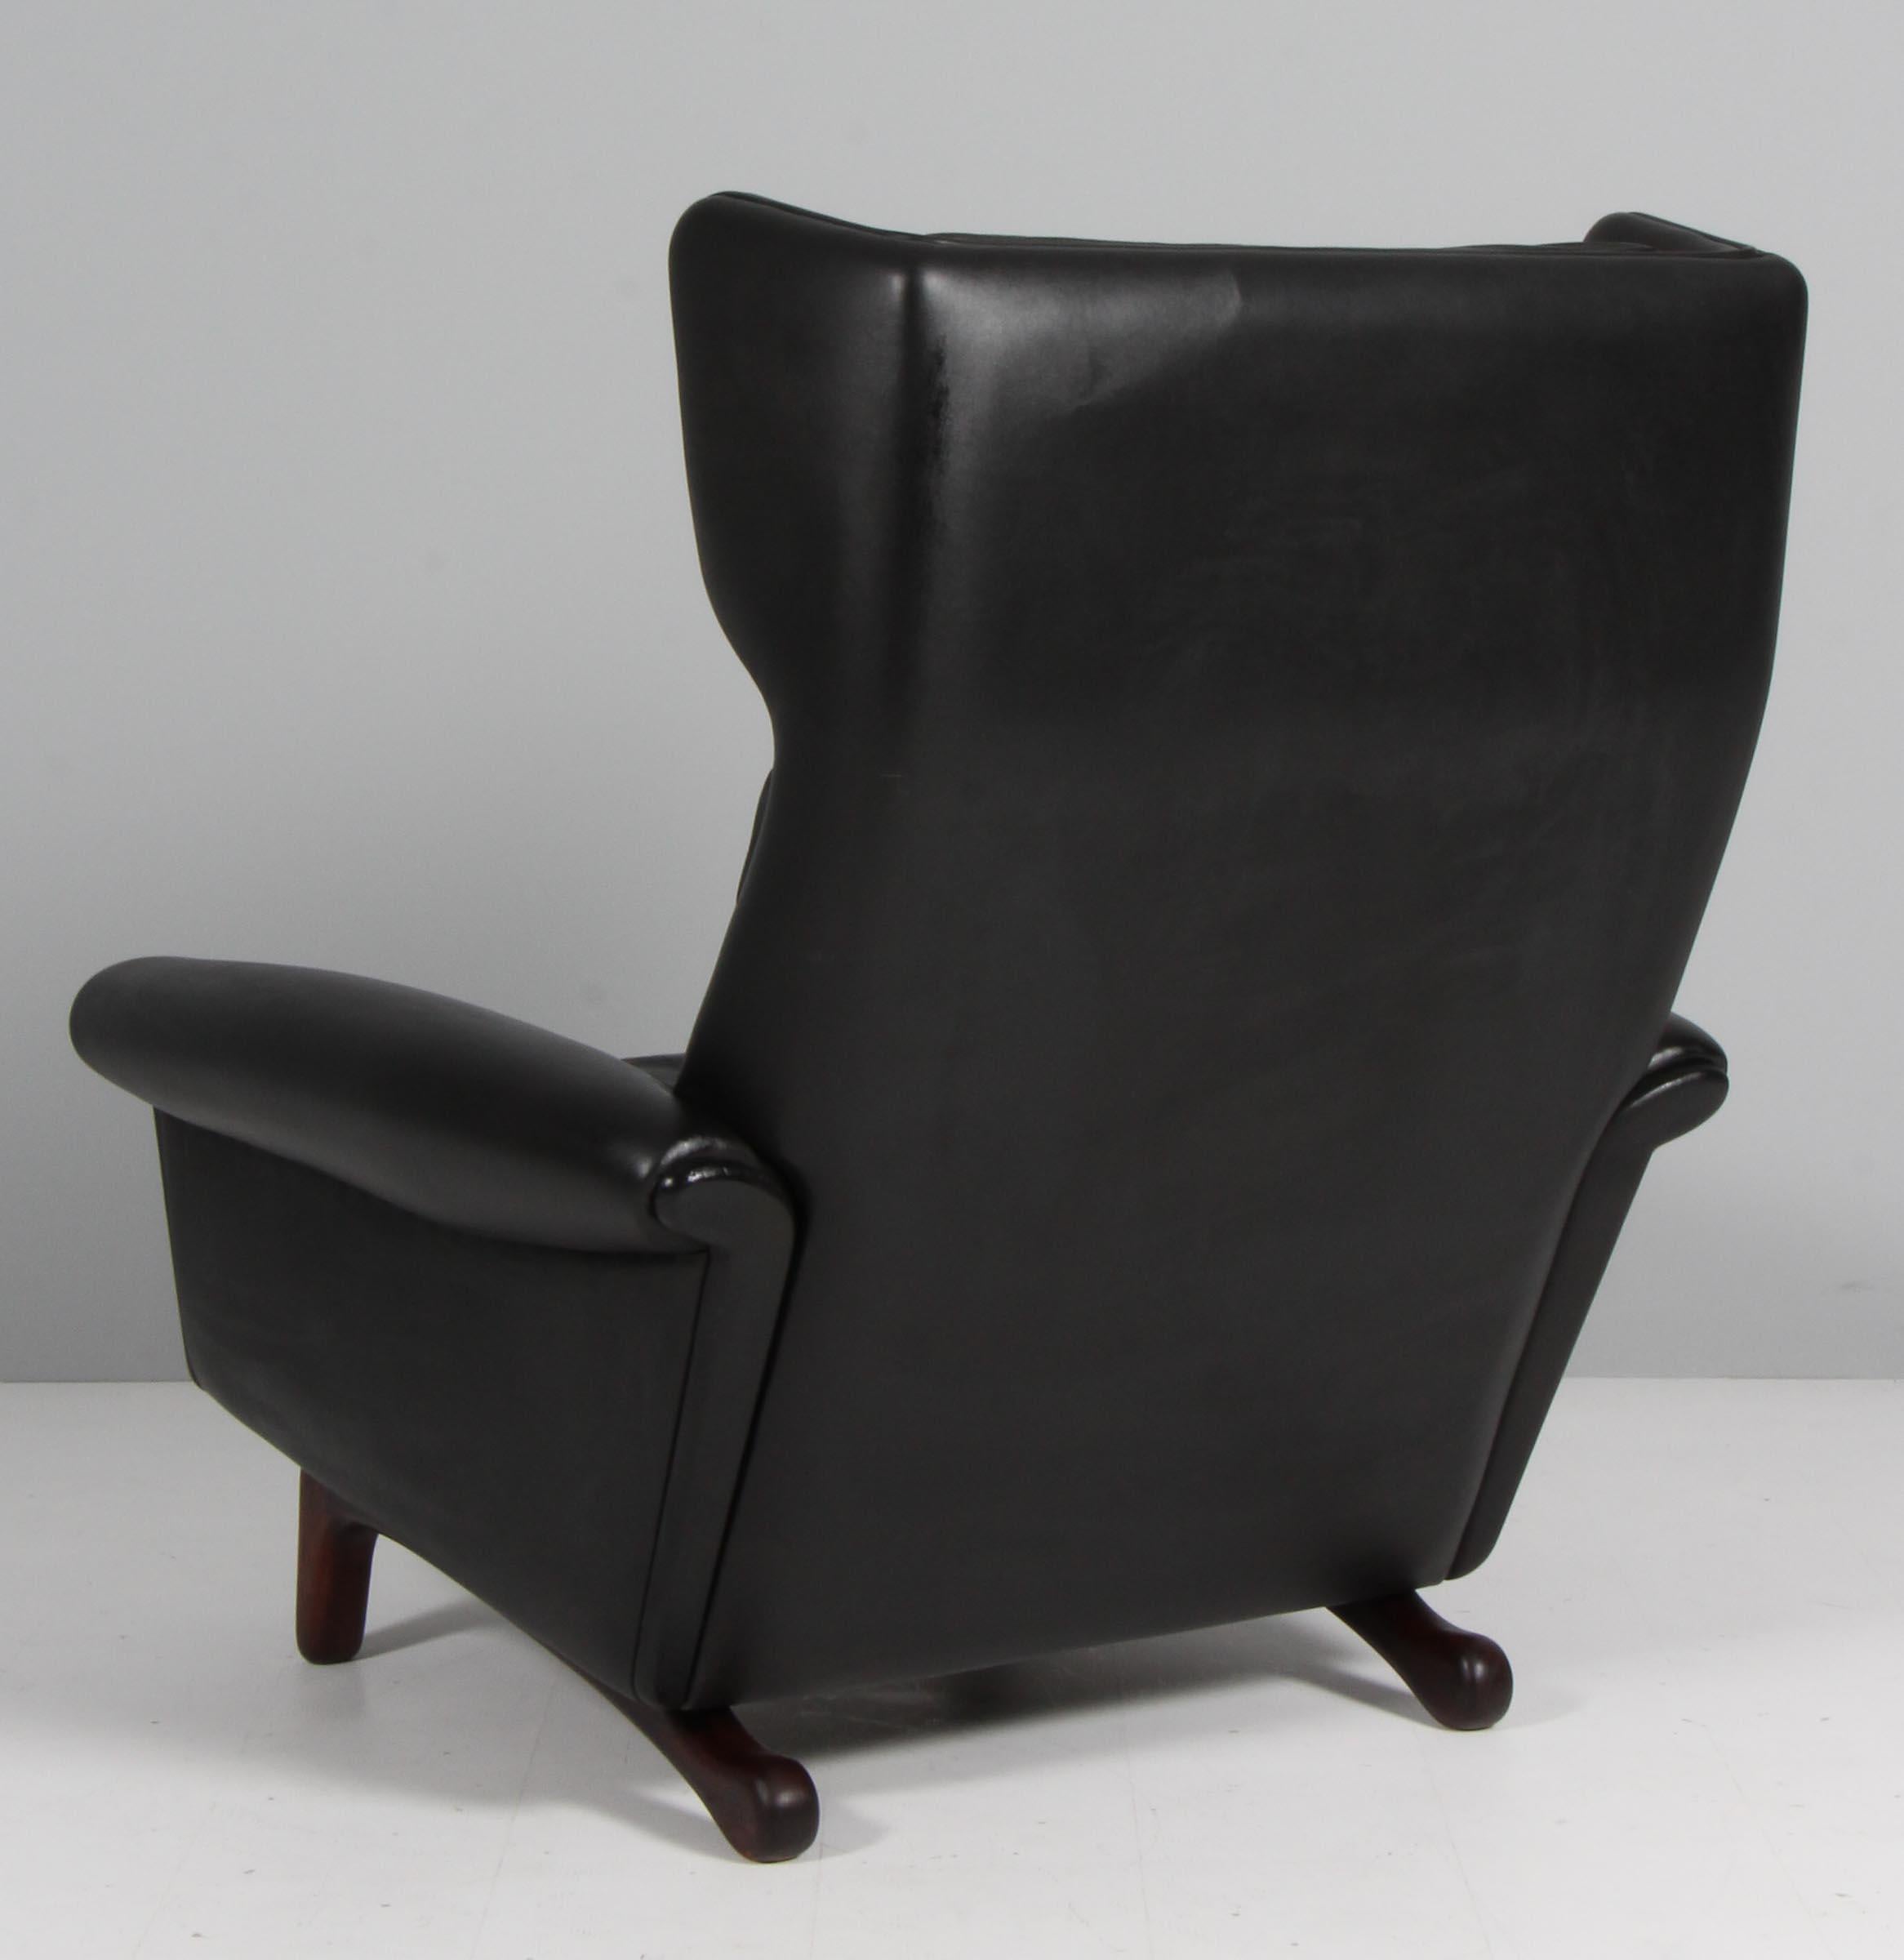 Leather Aage Christiansen for Esra Møbeler. Lounge chair in original black leather. For Sale